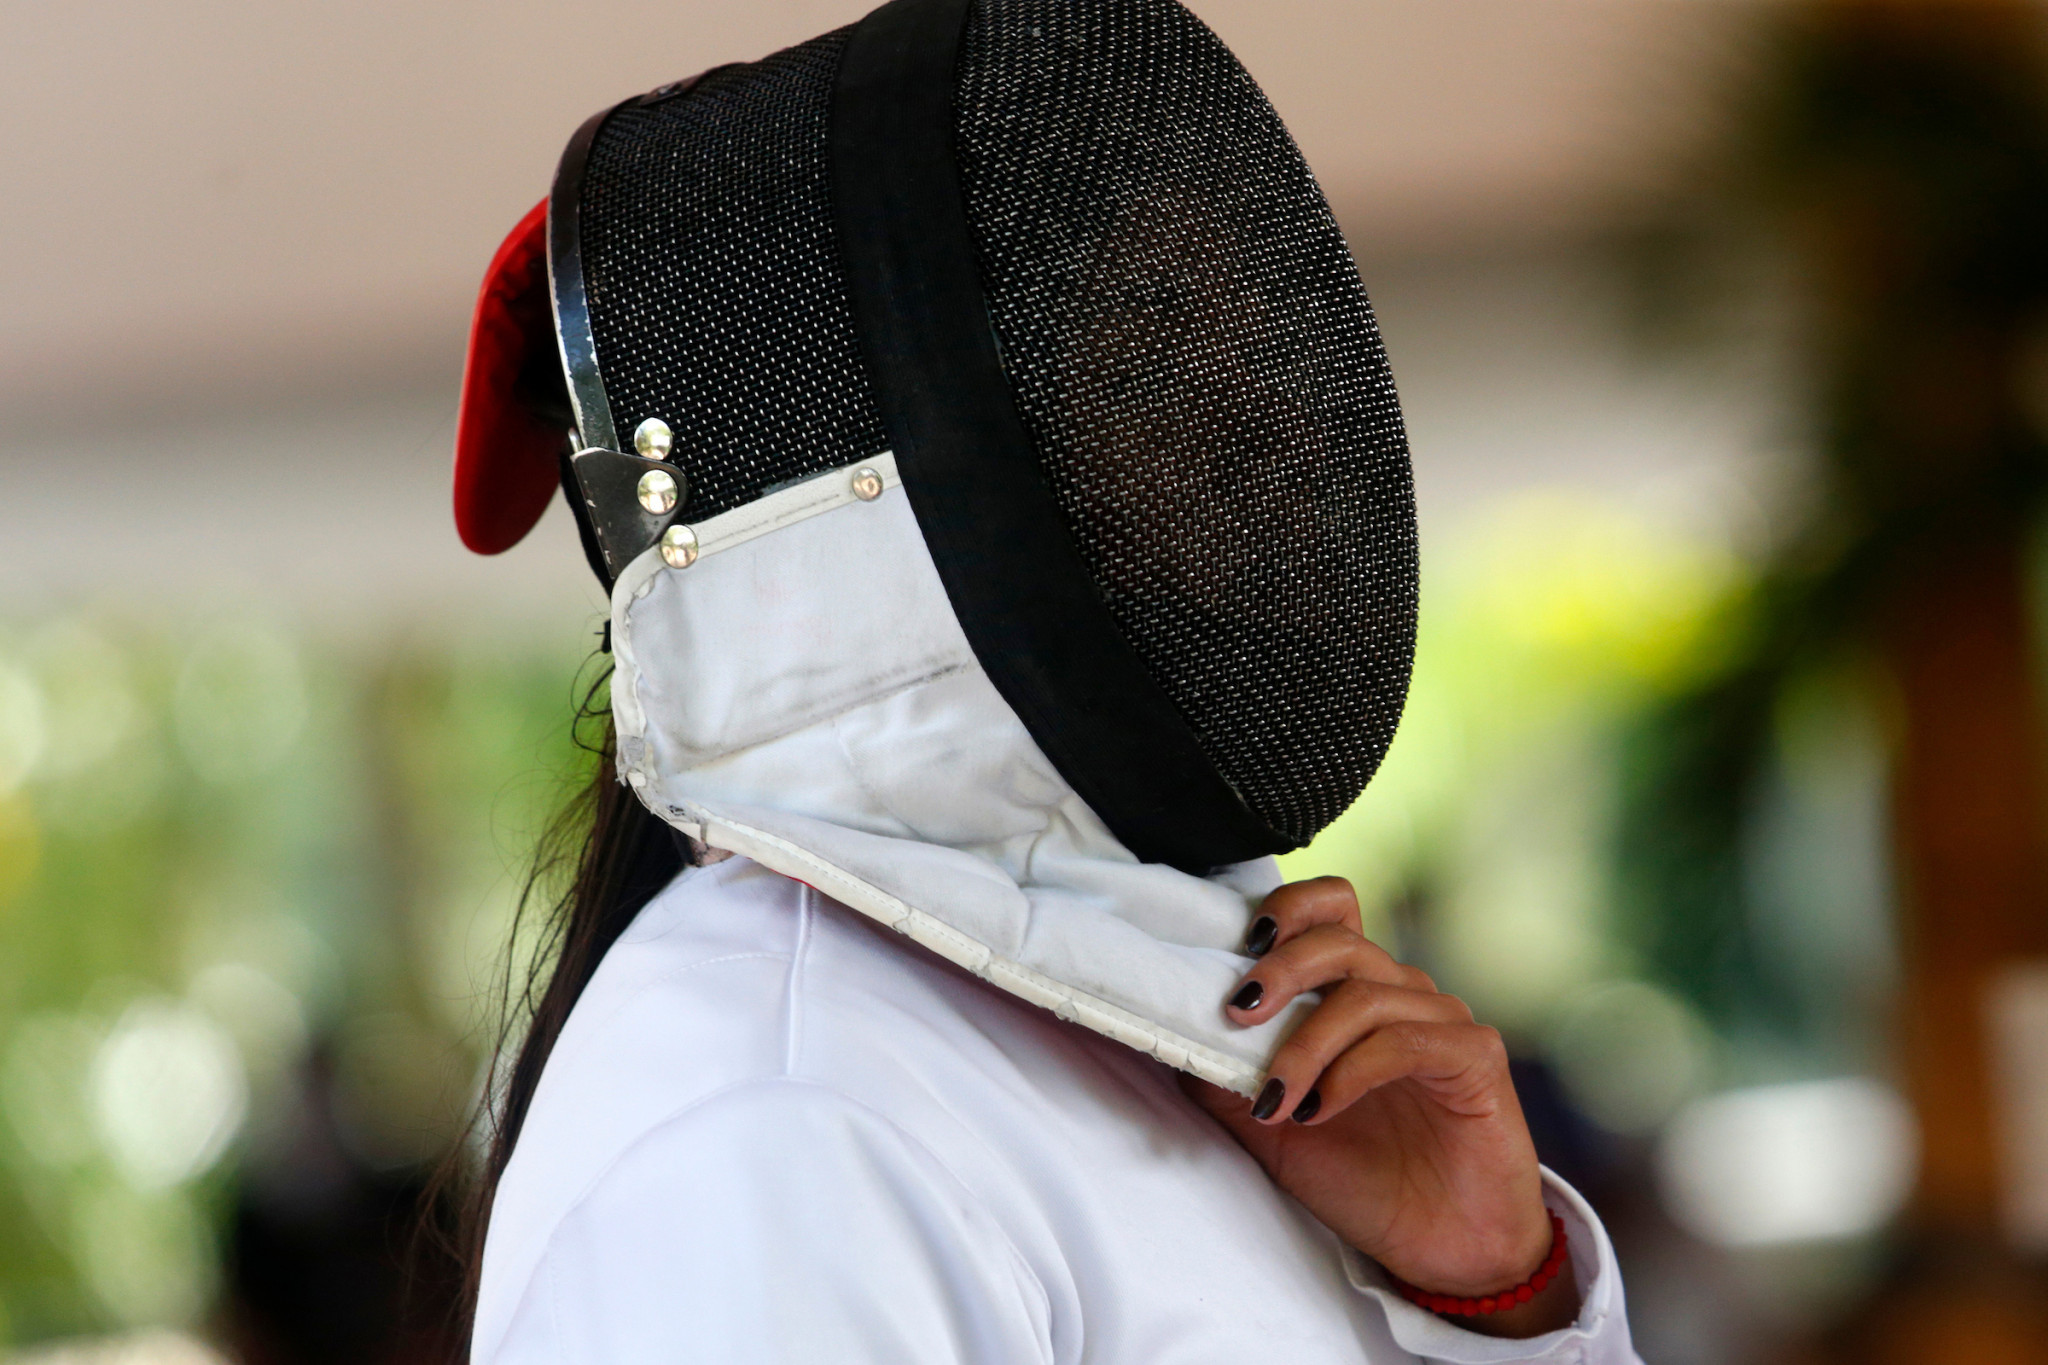 Mexico's Catherine Mayran Oliver Lara was crowned as the individual women's modern pentathlon champion on day seven of competition ©Agencia.Xpress Media